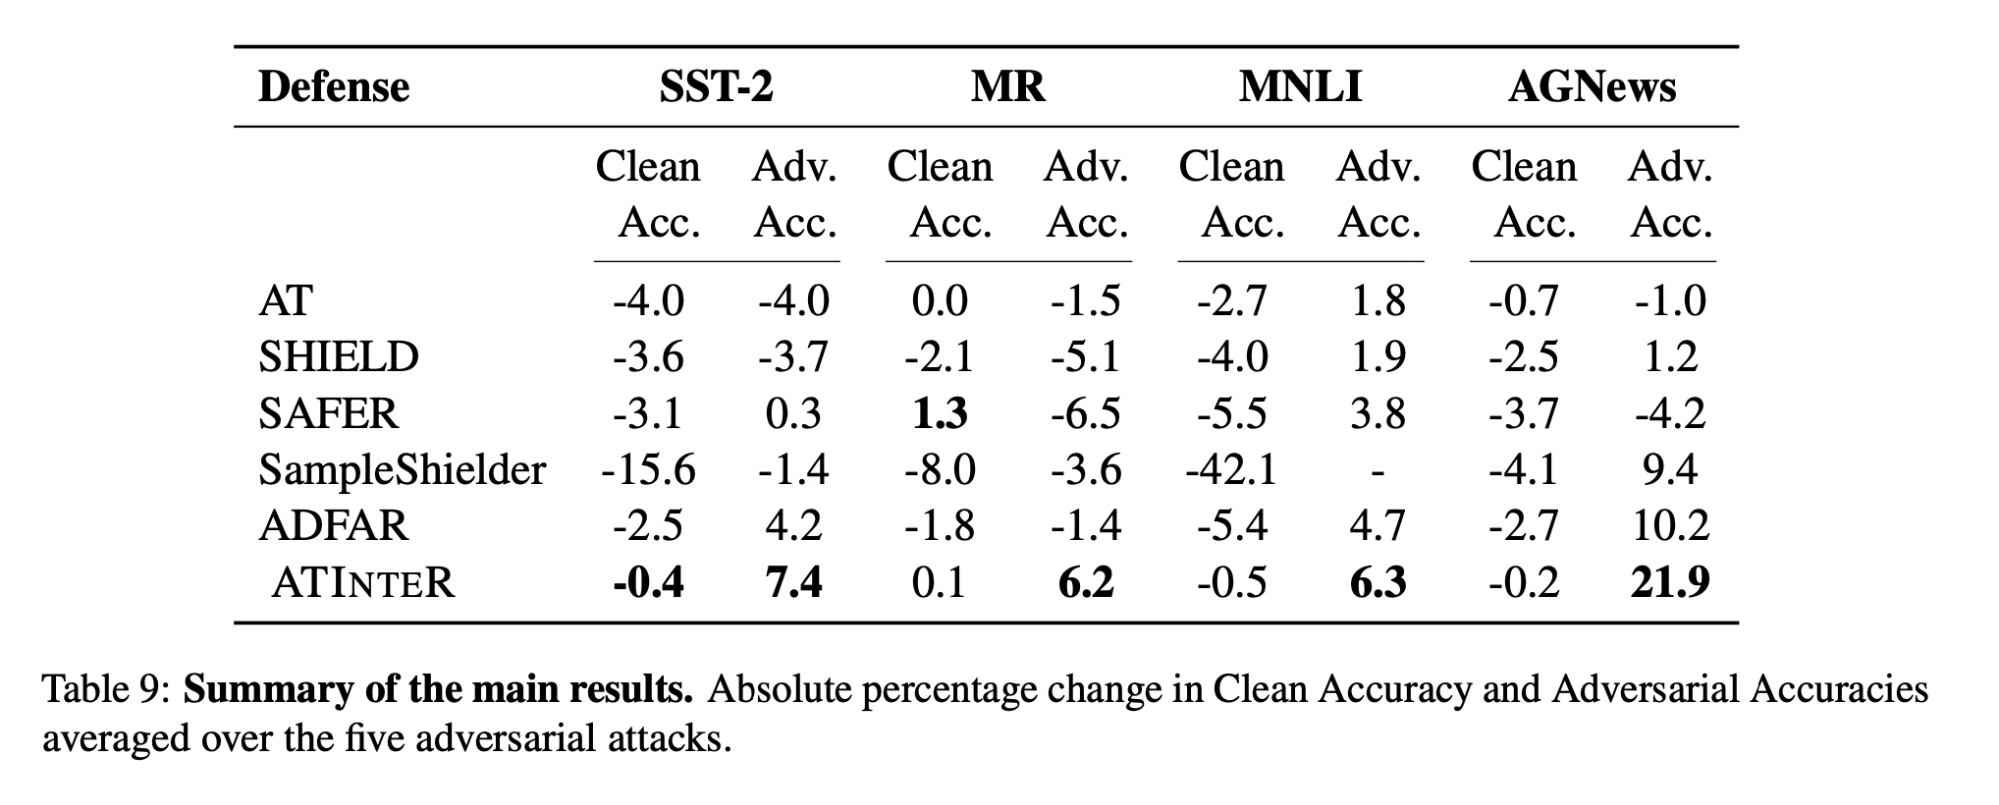 Table 9: Summary of the main results. Absolute percentage change in Clean Accuracy and Adversarial Accuracies averaged over the five adversarial attacks.